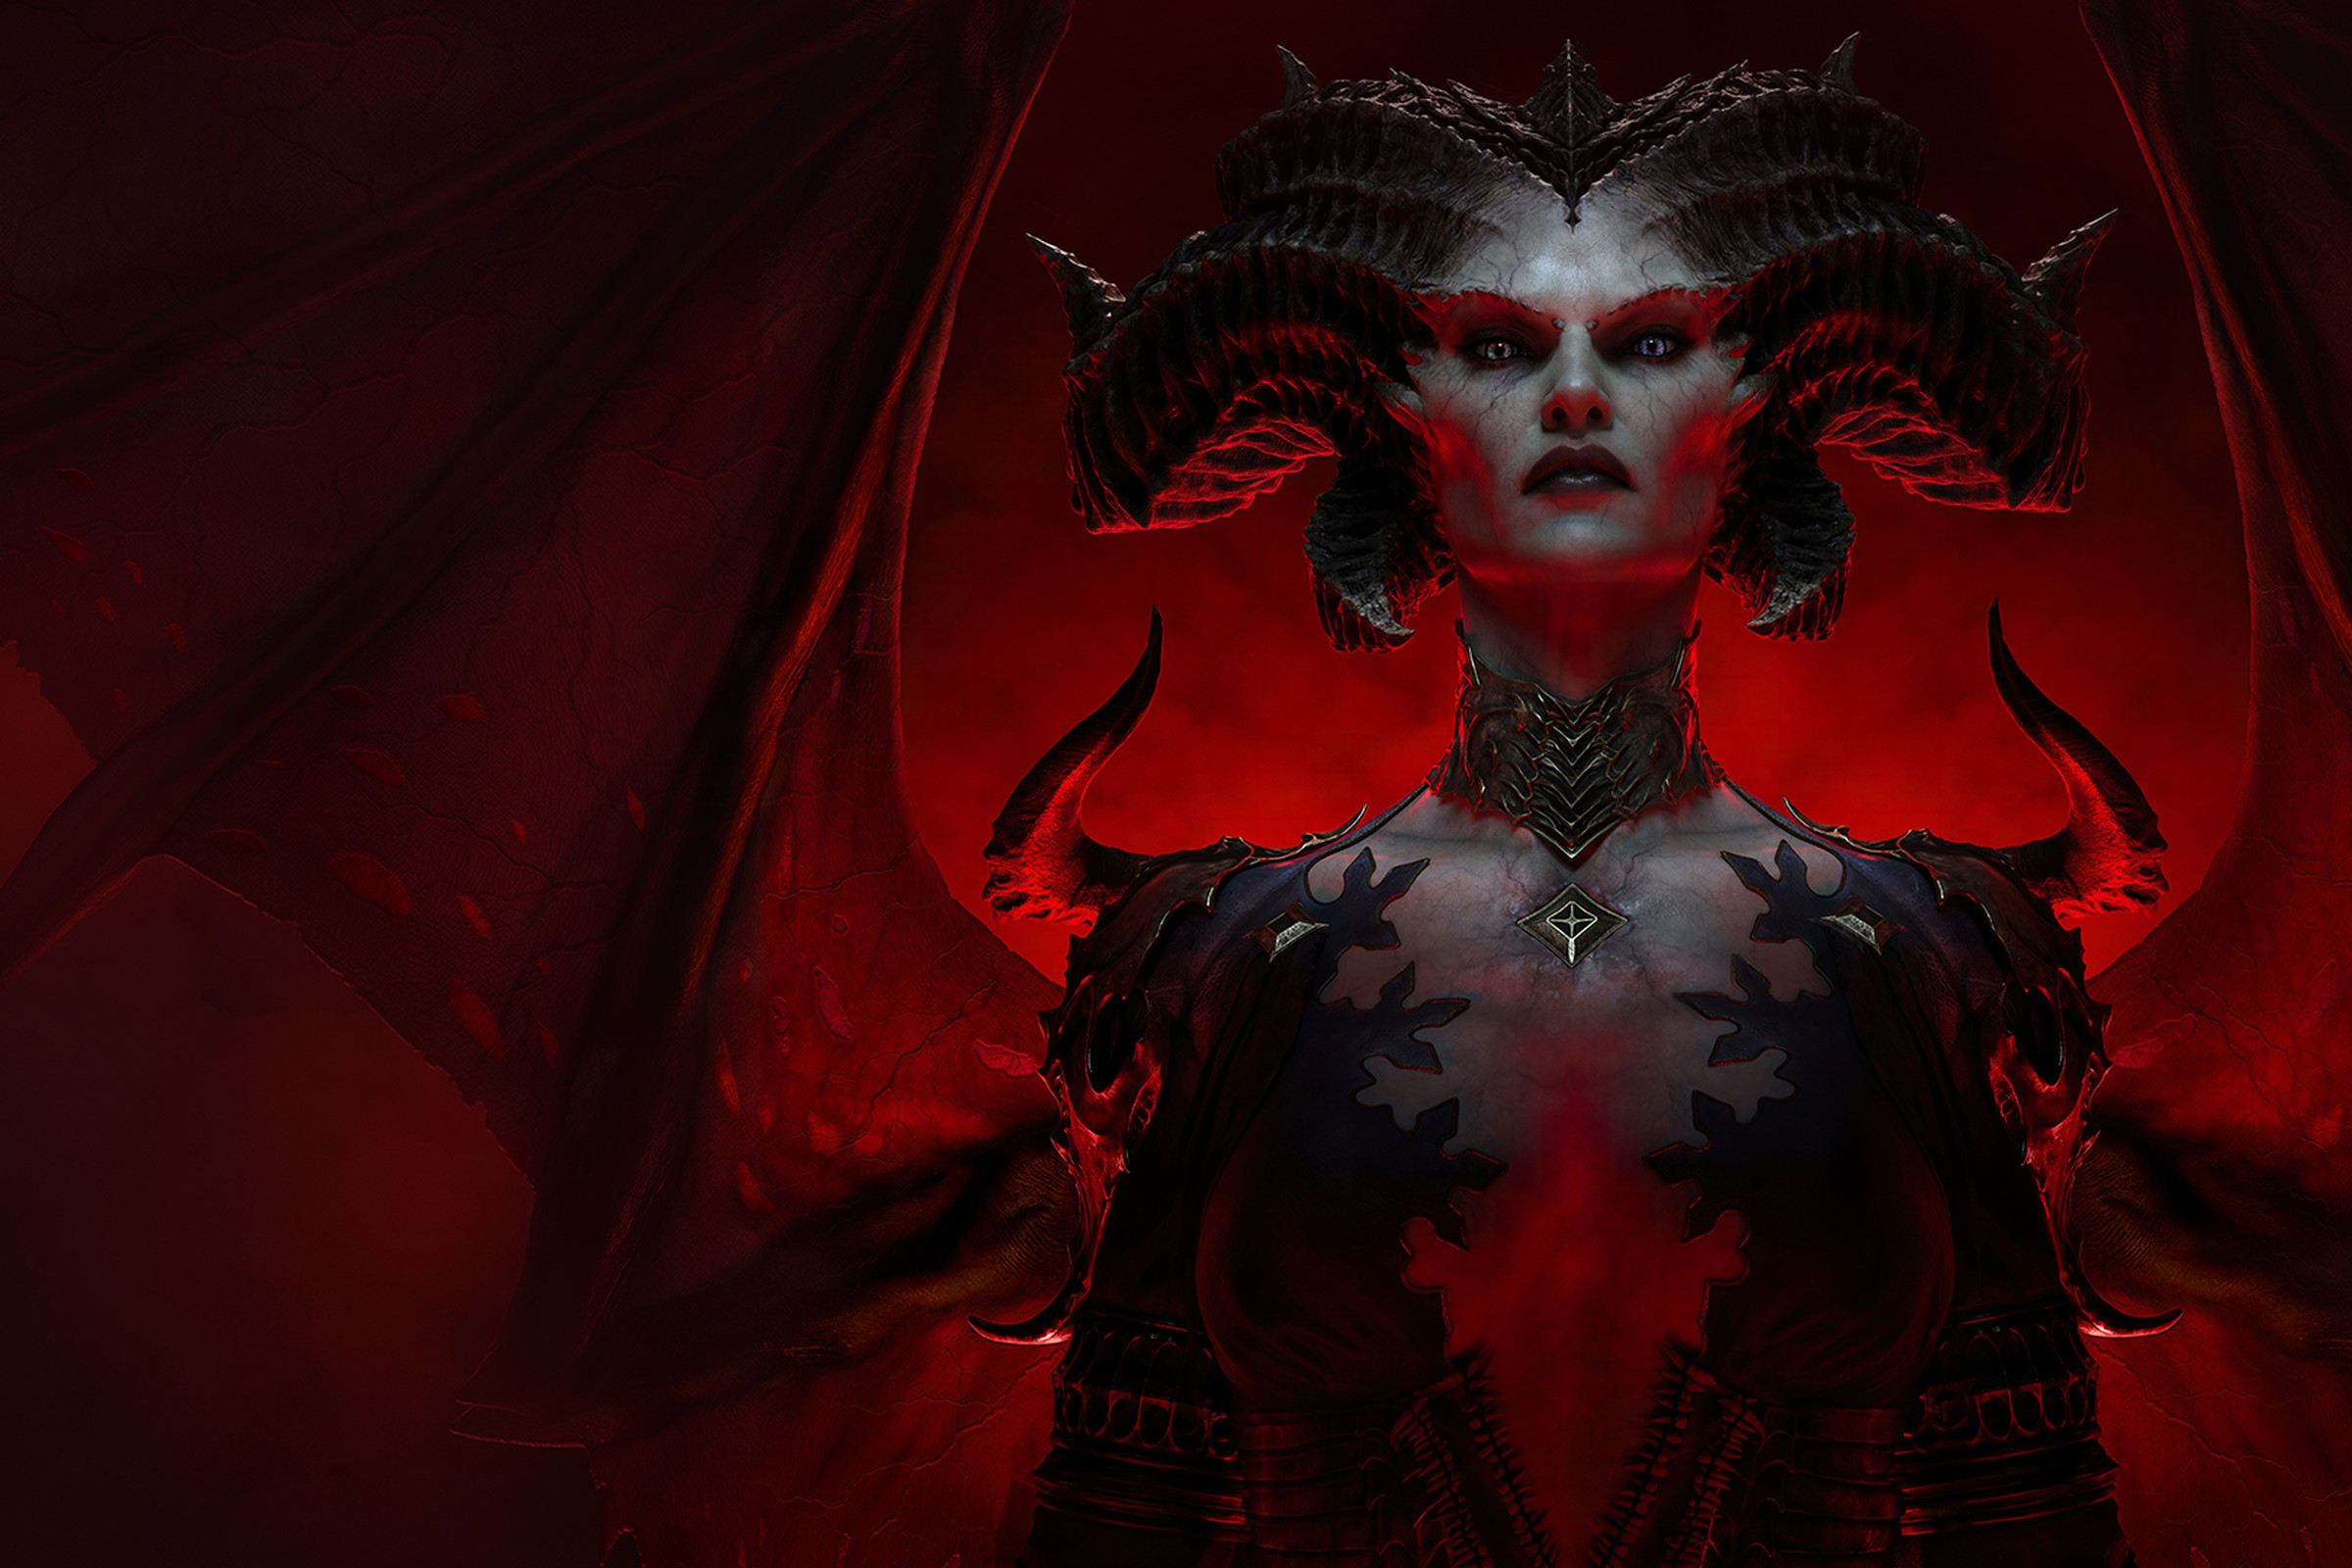 An image showing Diablo’s Lilith